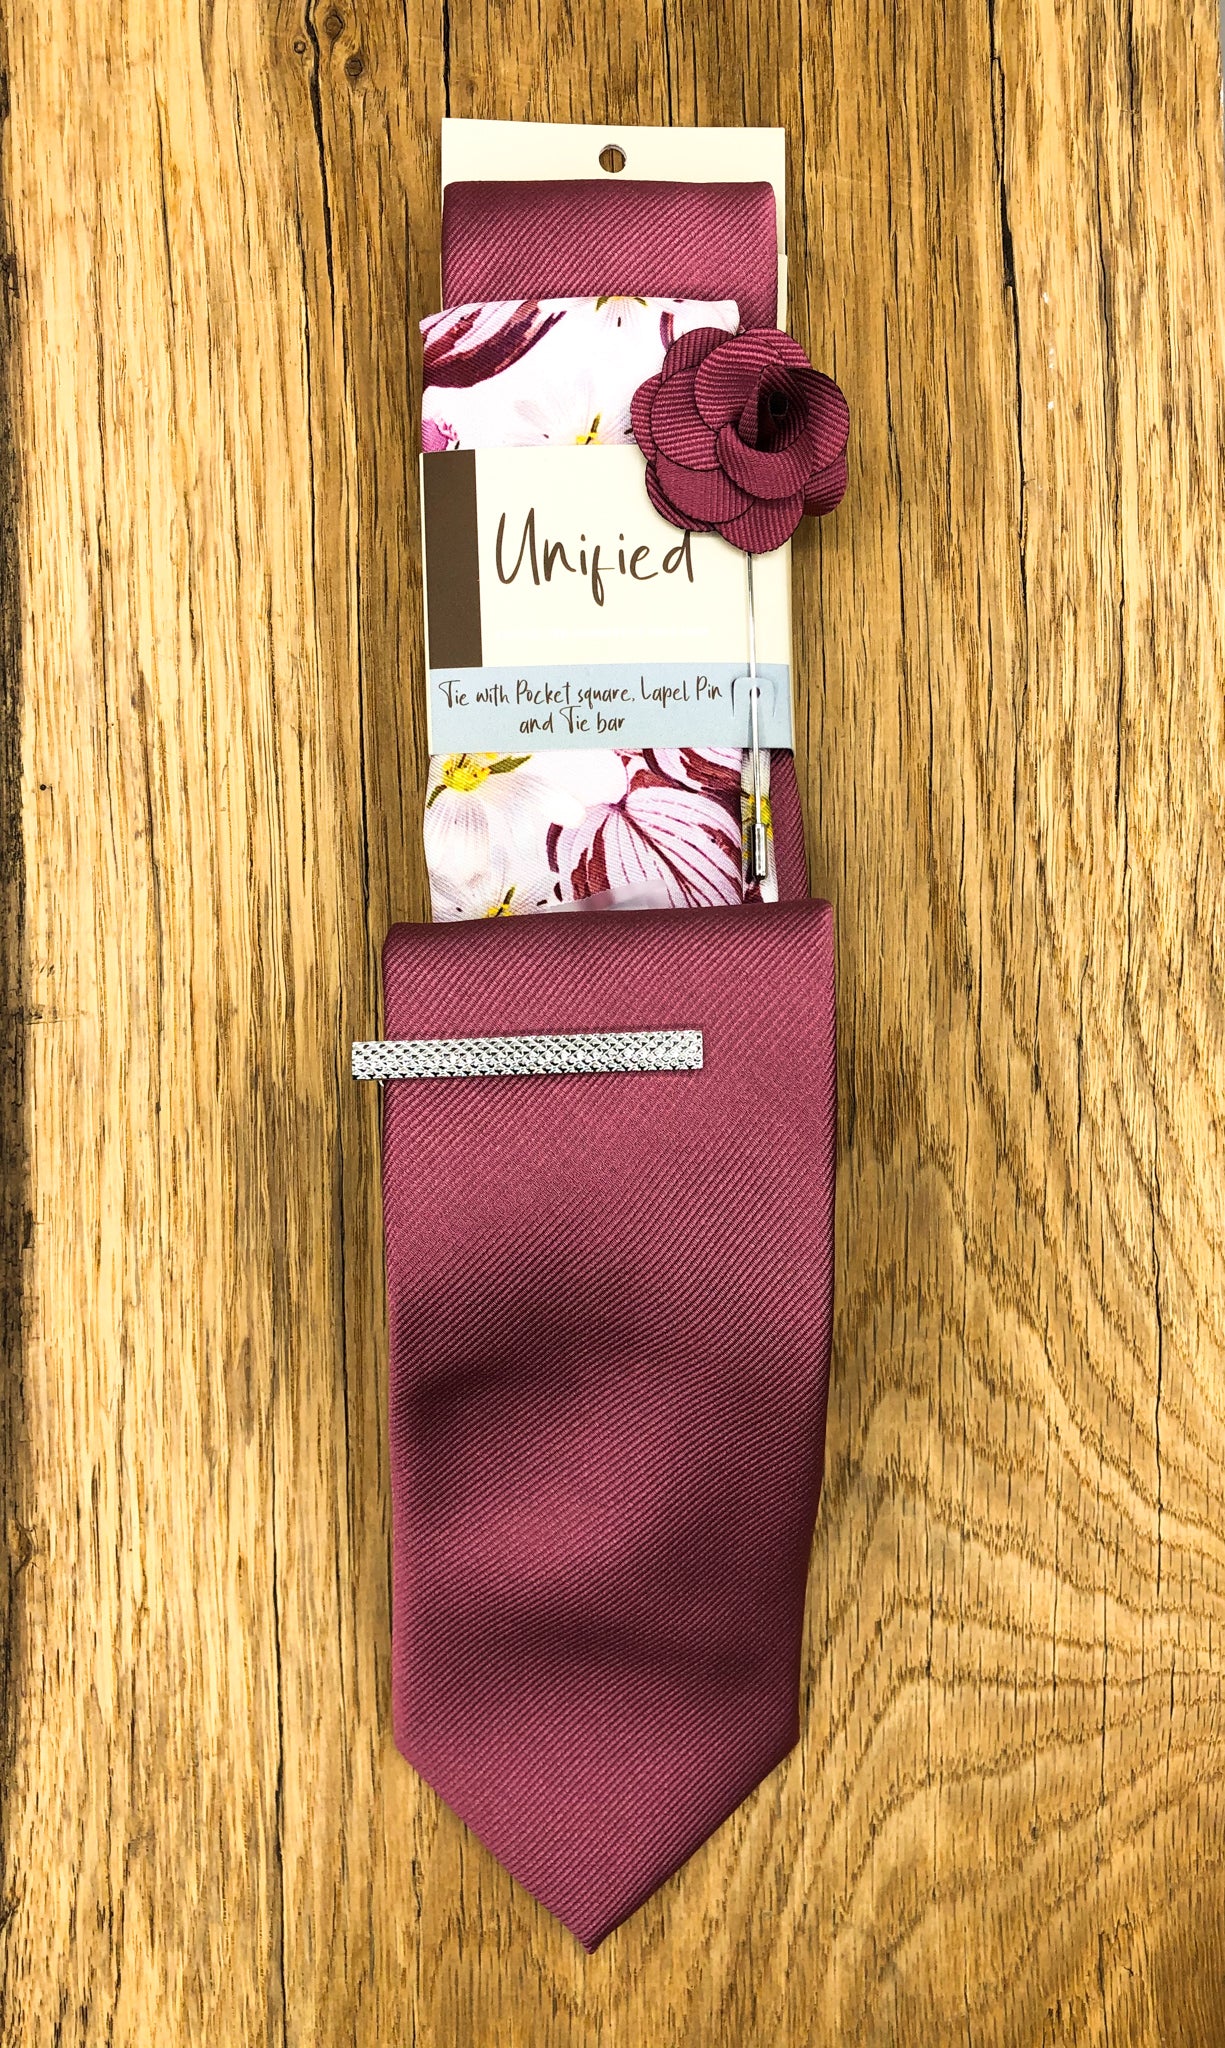 Dark Pink Tie with Floral Pocket Square, Lapel Pin, Tie Bar and Fabric Bag